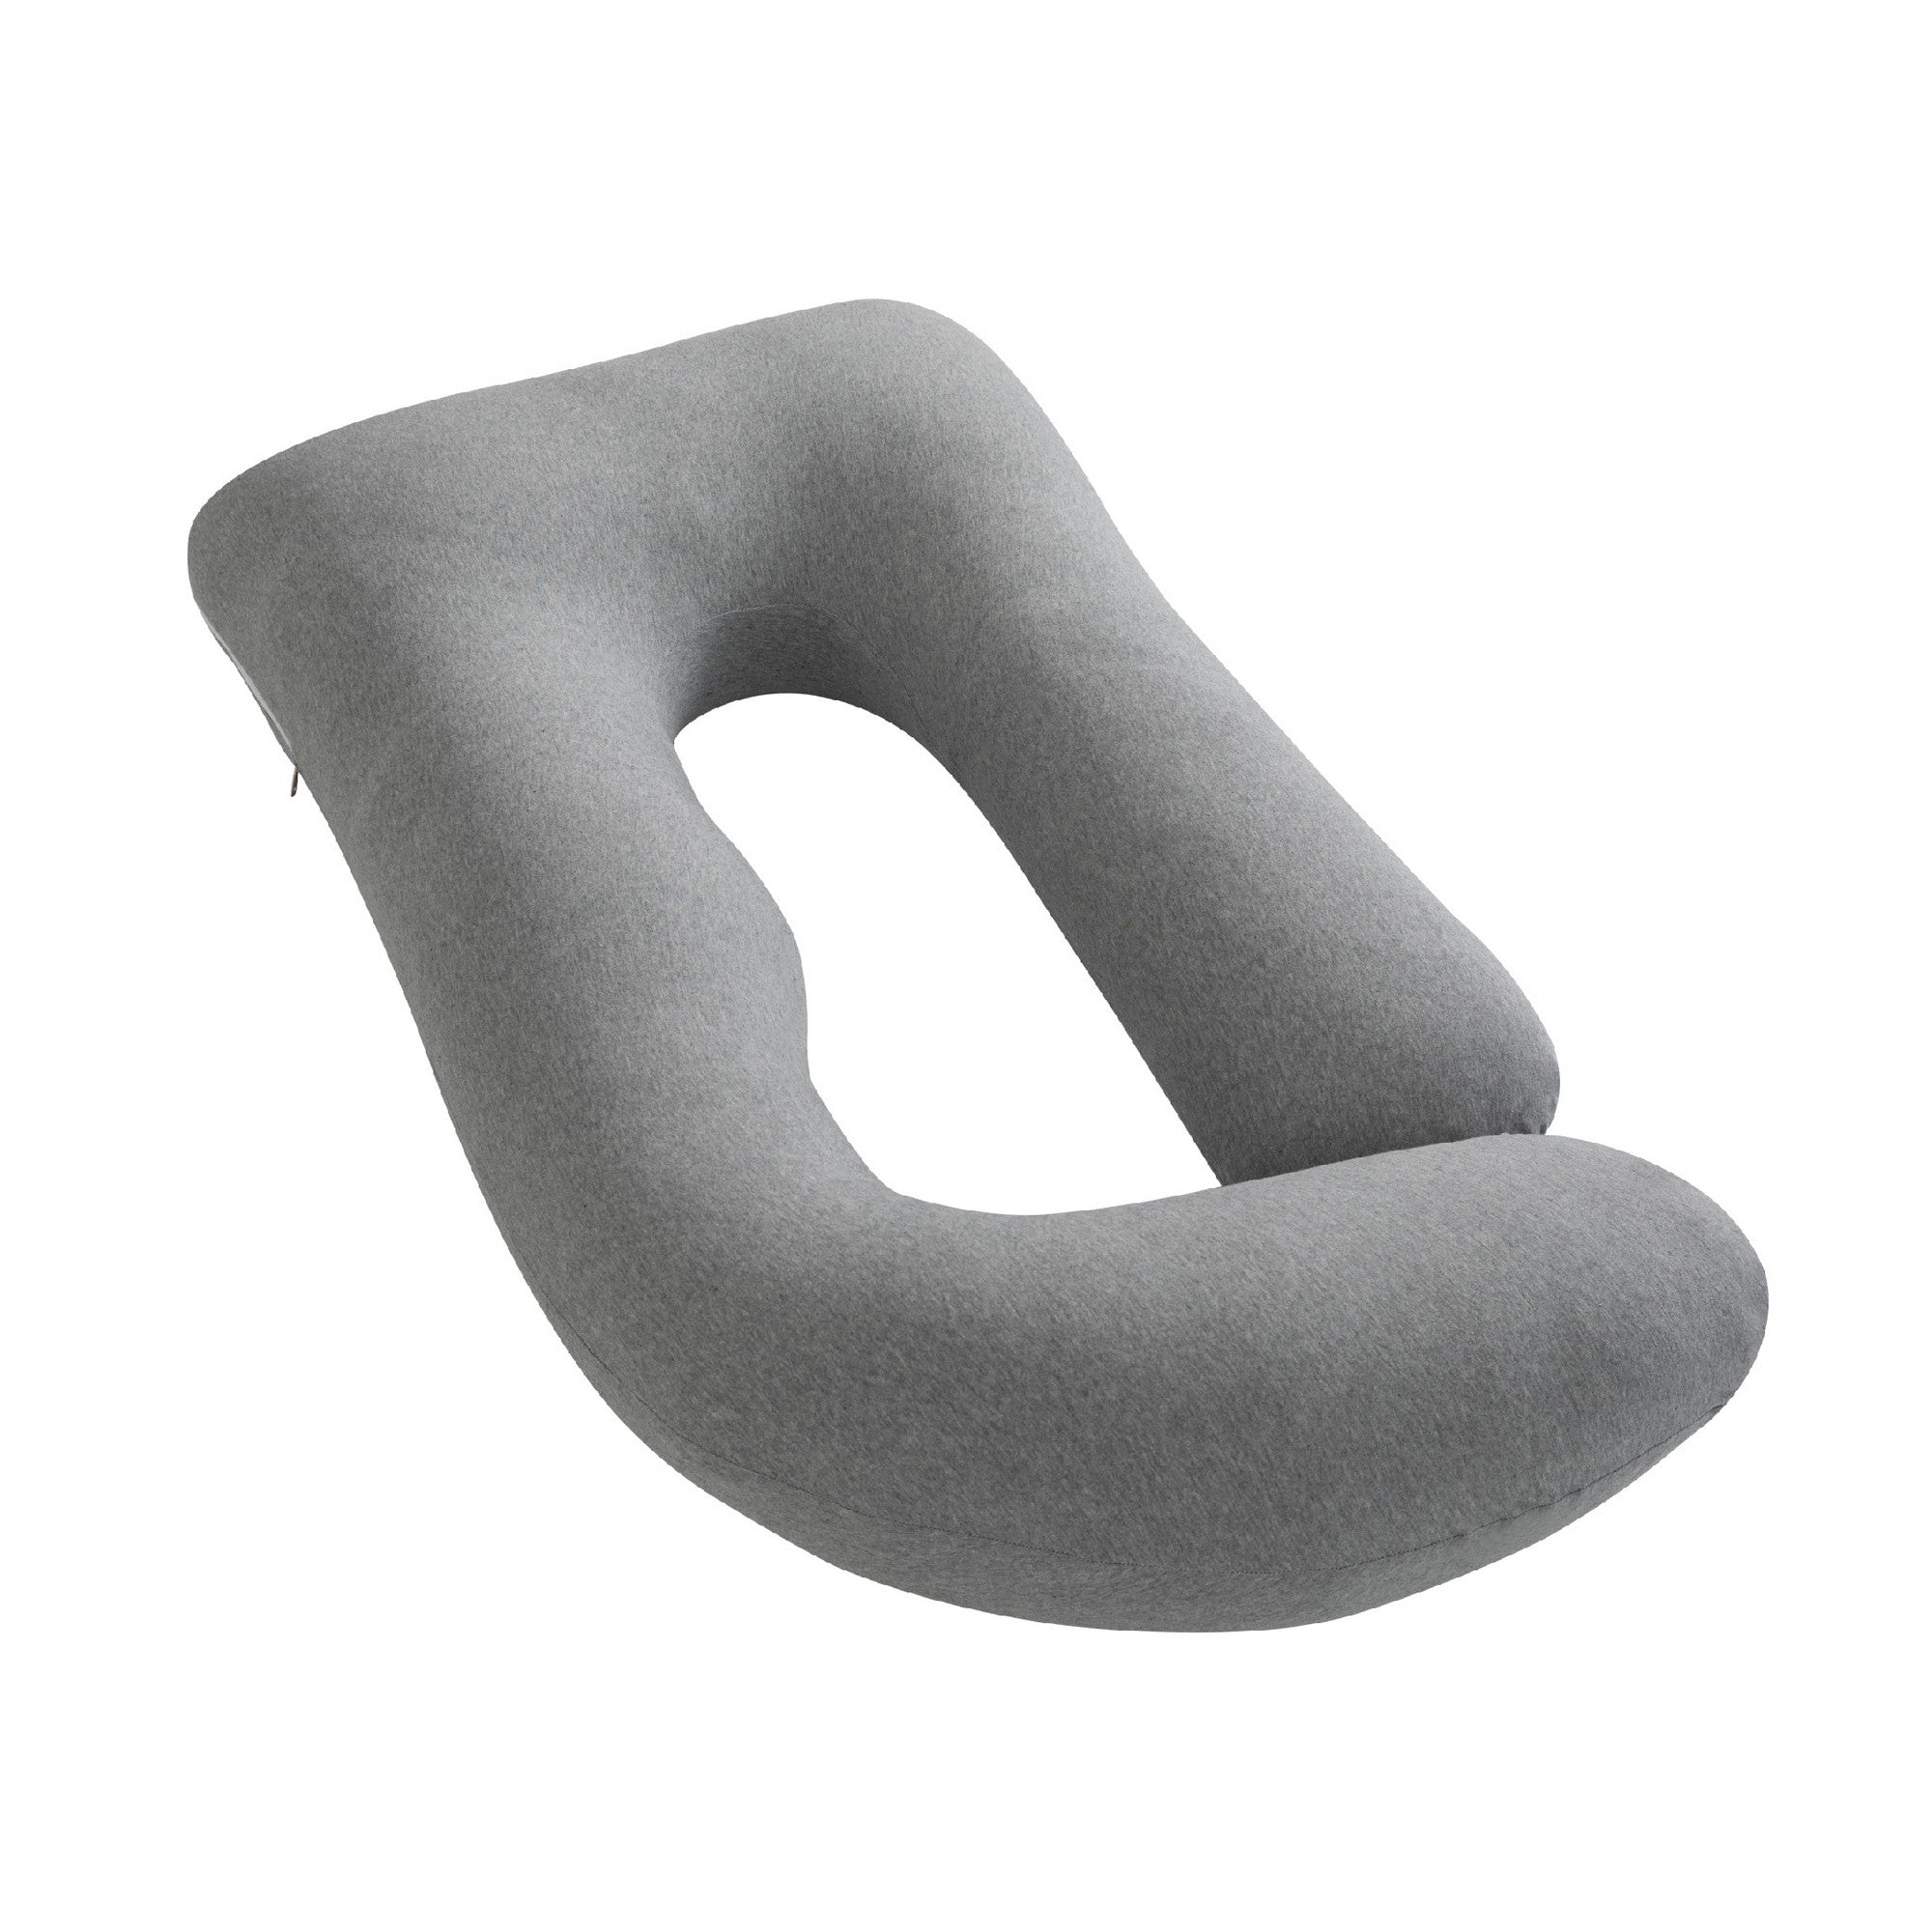 Moon Organic U Shaped Contour Maternity Pillow for Pregnent Ladies